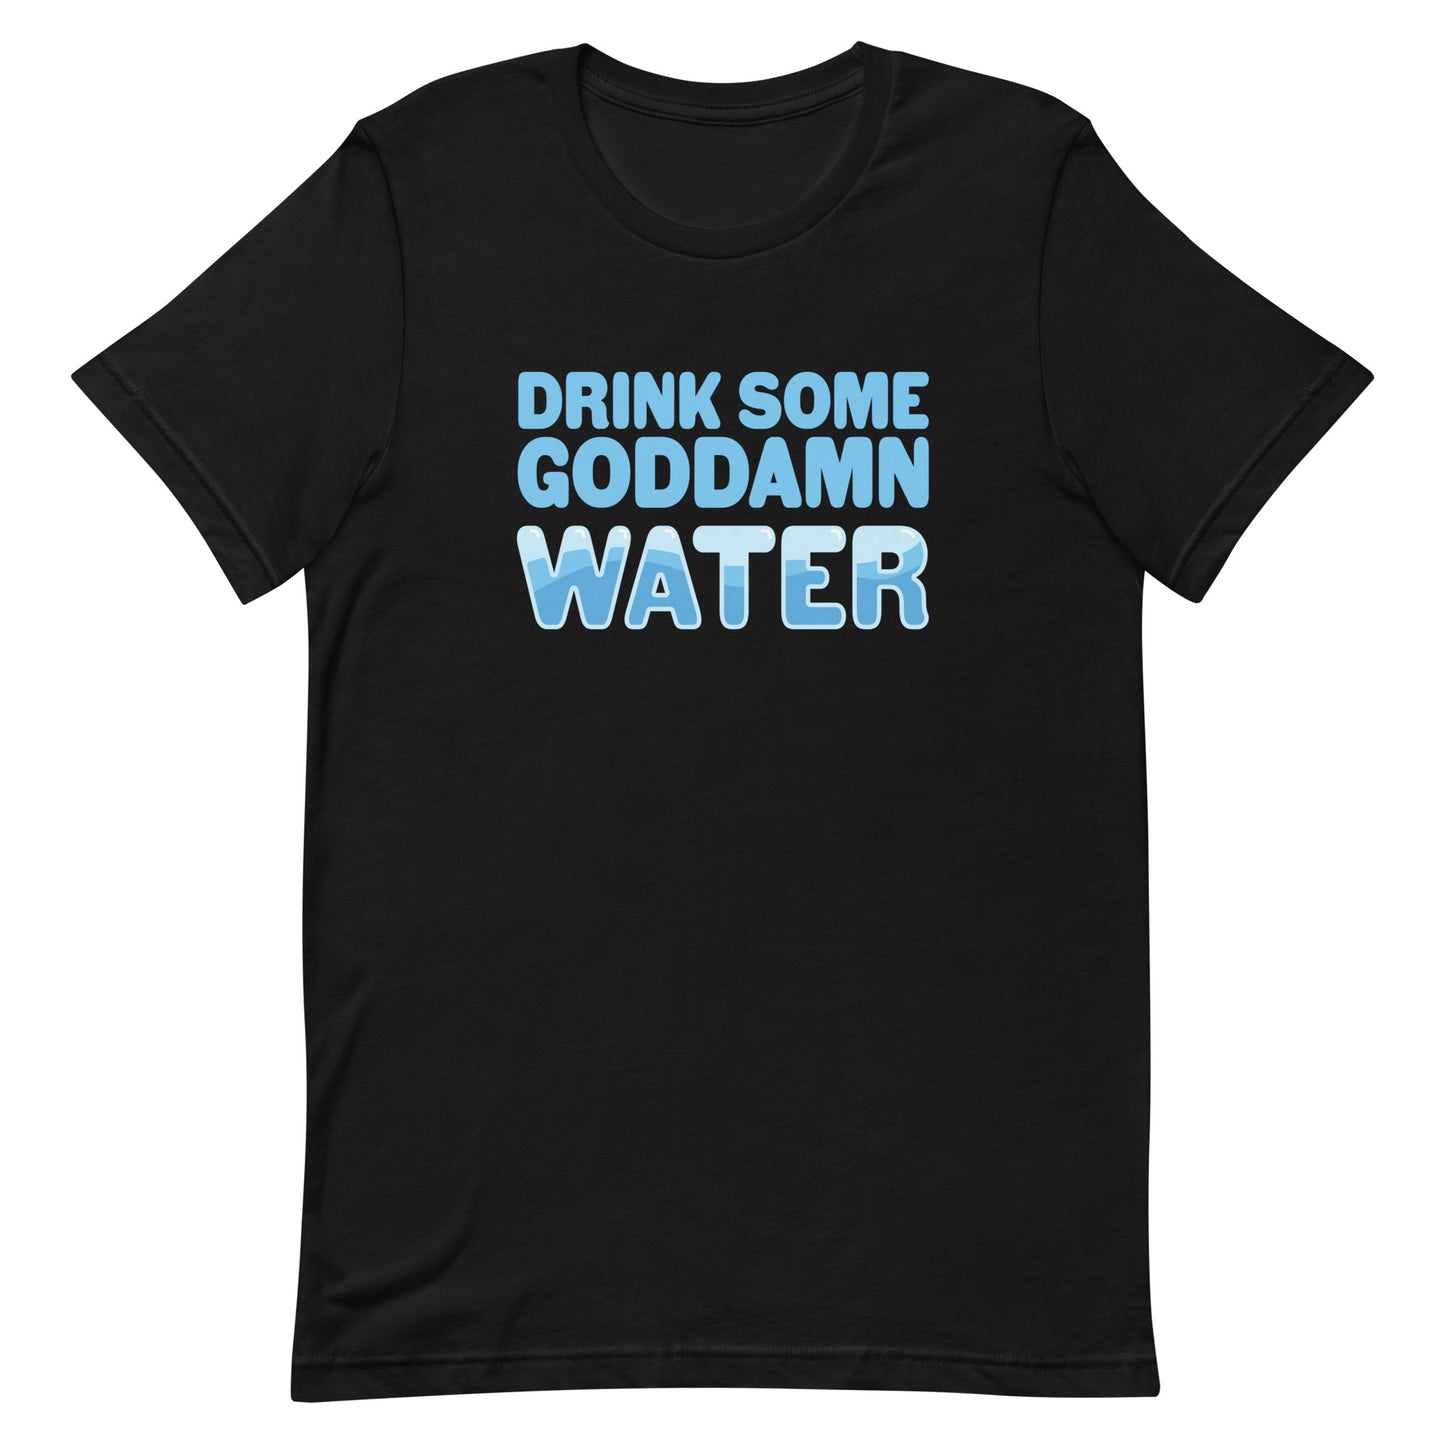 A black crewneck t-shirt with blue bubble text that reads "Drink some goddamn water"